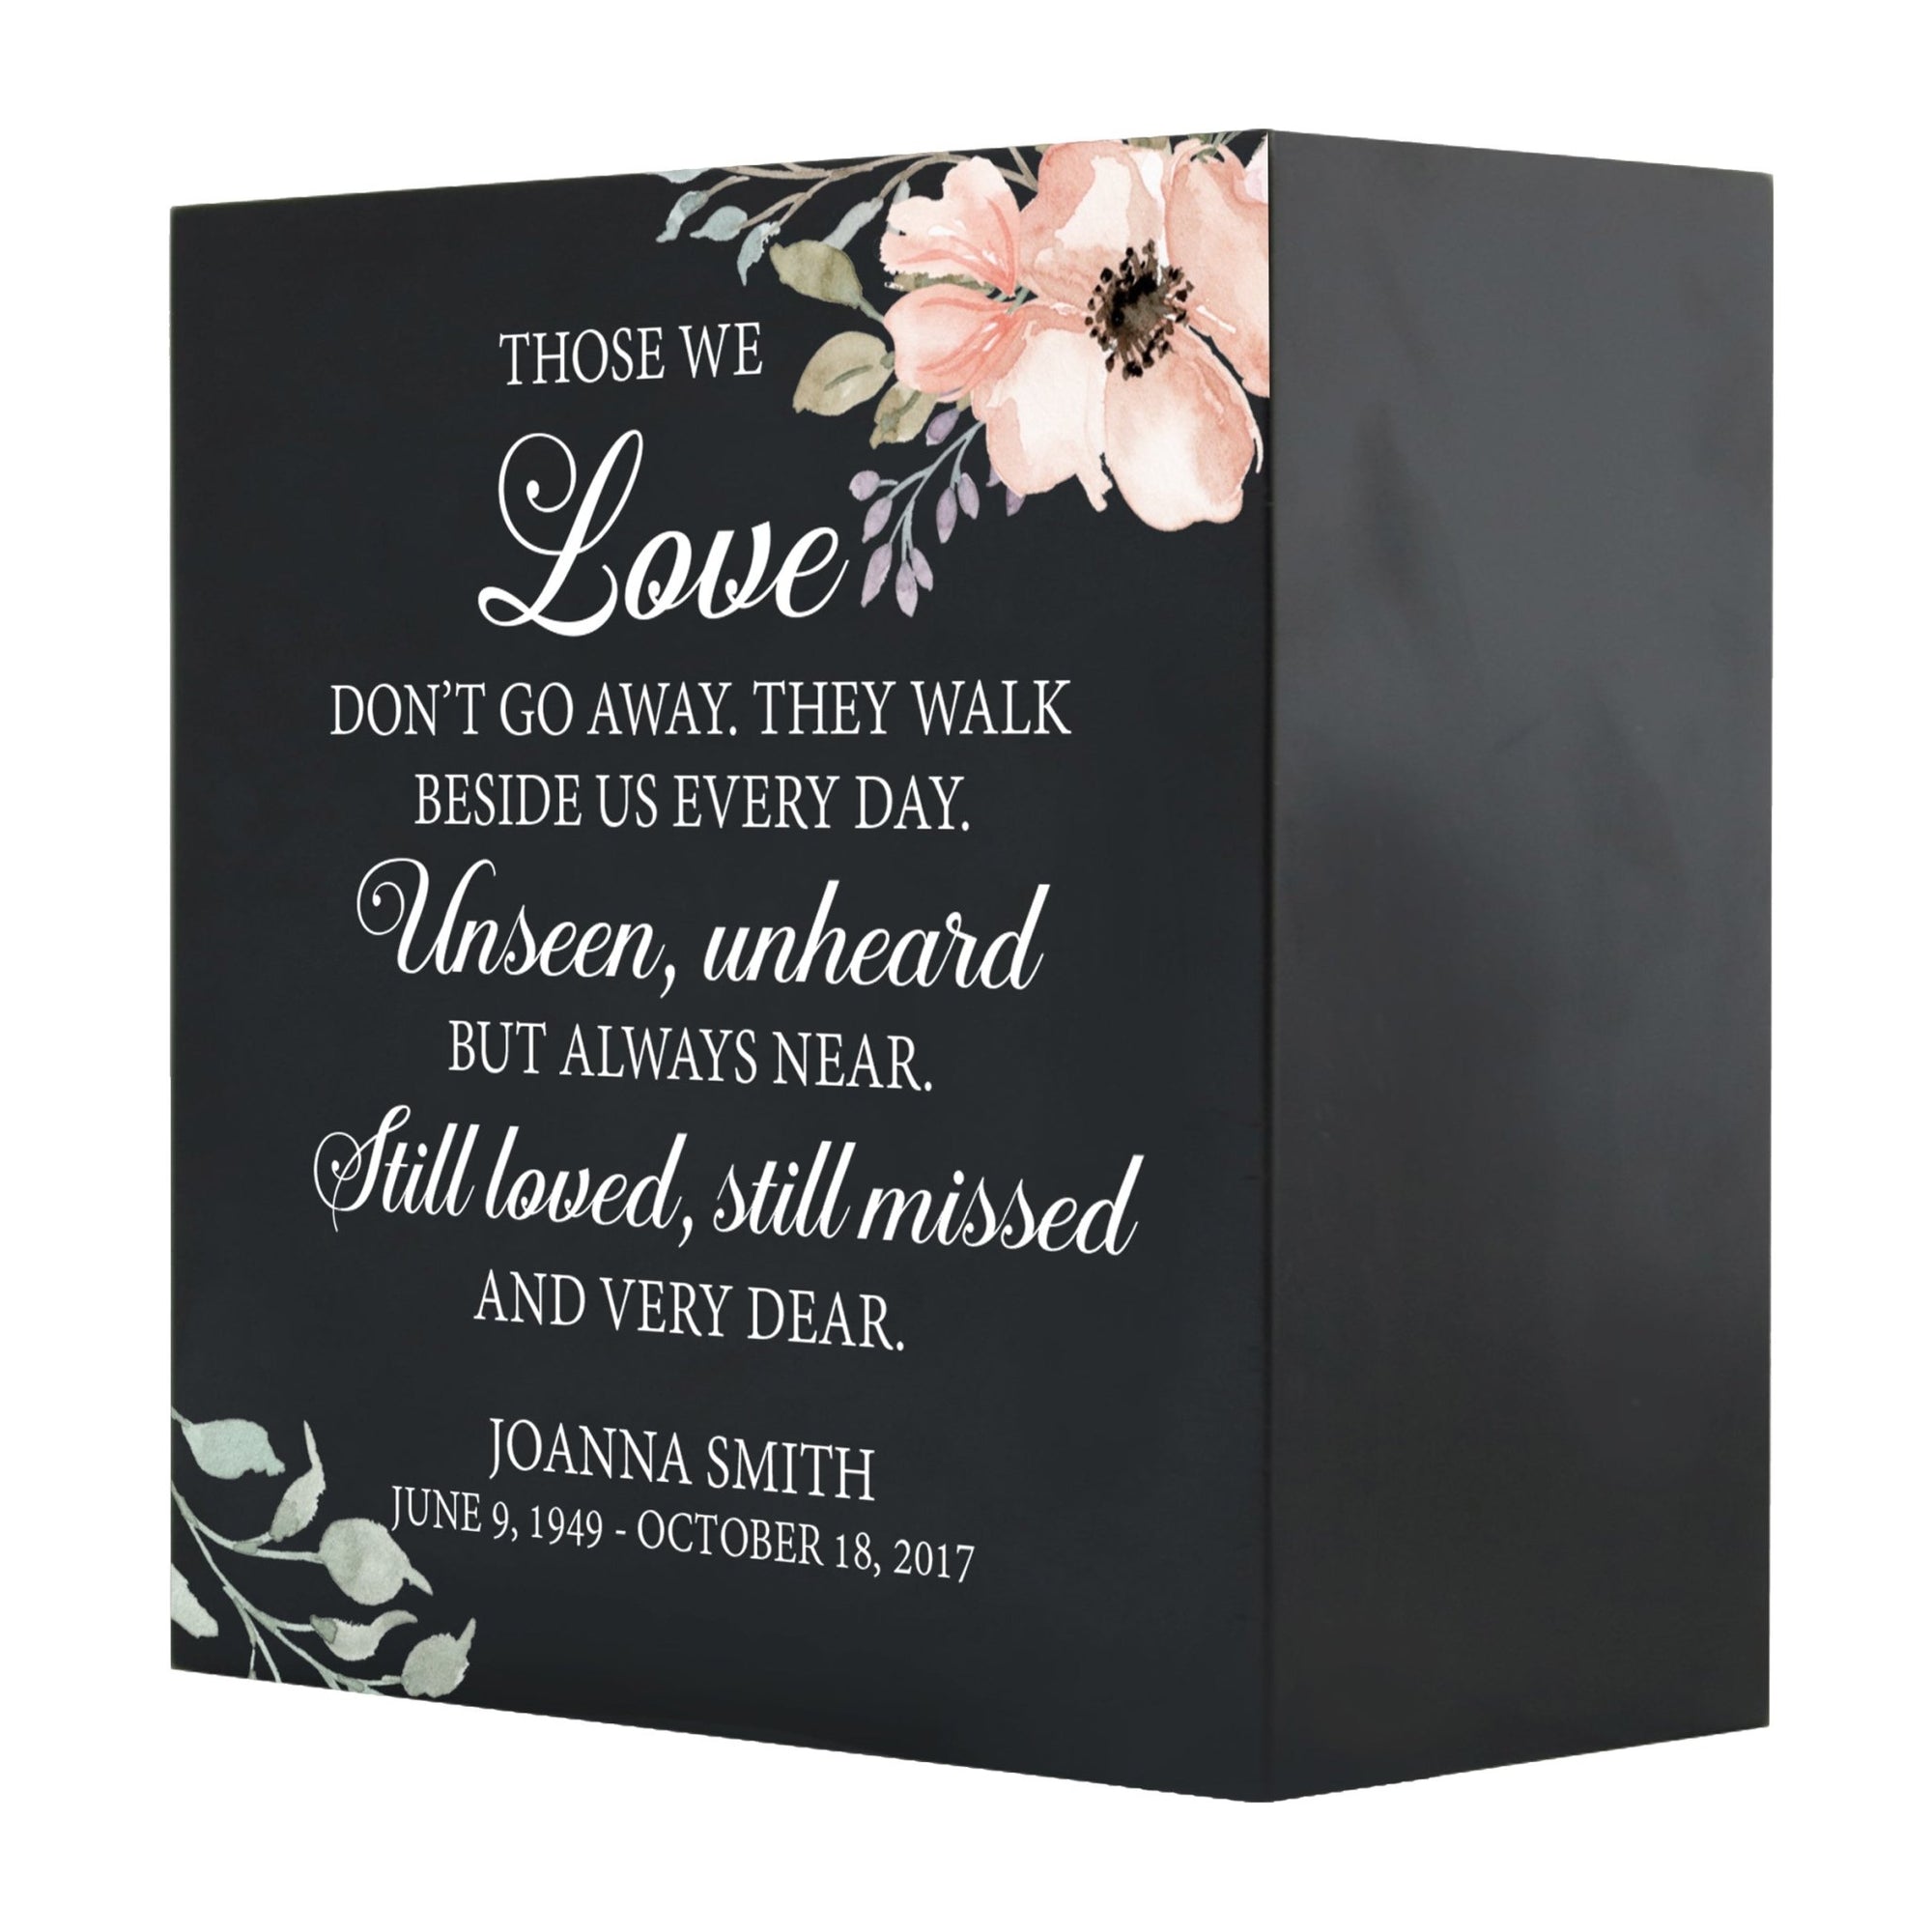 Personalized Modern Inspirational Memorial Wooden Shadow Box and Urn 6x6 holds 53 cu in of Human Ashes - Those We Love Don’t Go (Black) - LifeSong Milestones